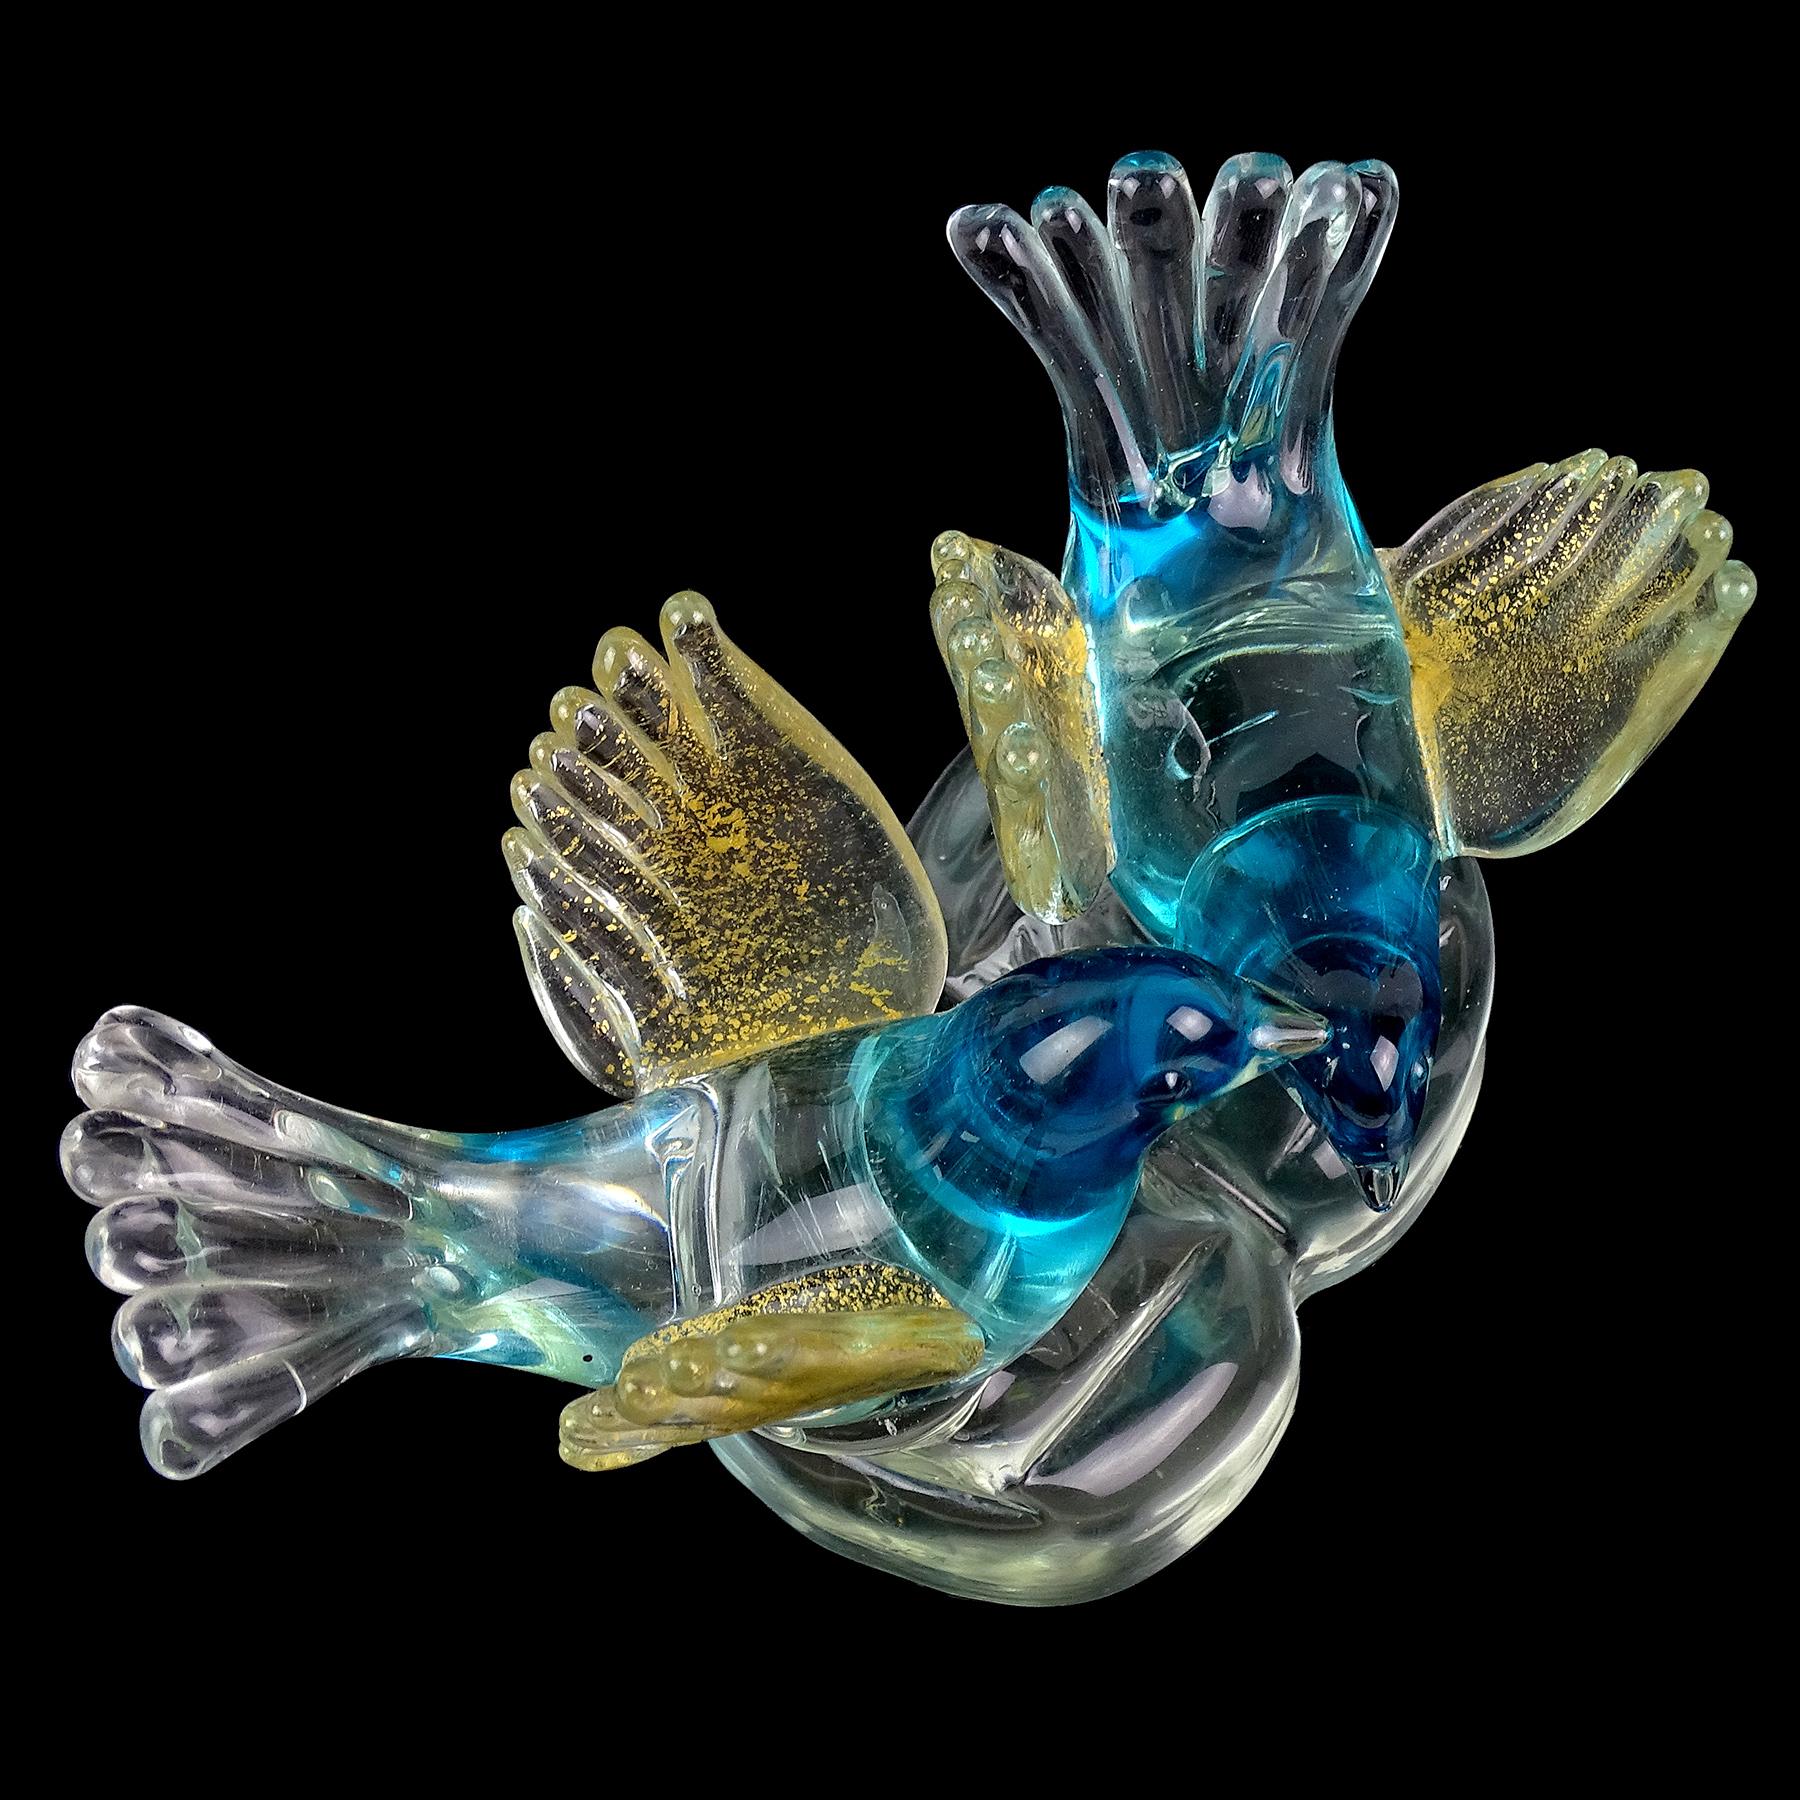 20th Century Murano Sommerso Aqua Blue Gold Leaf Italian Art Glass Bird Figures Paperweight For Sale